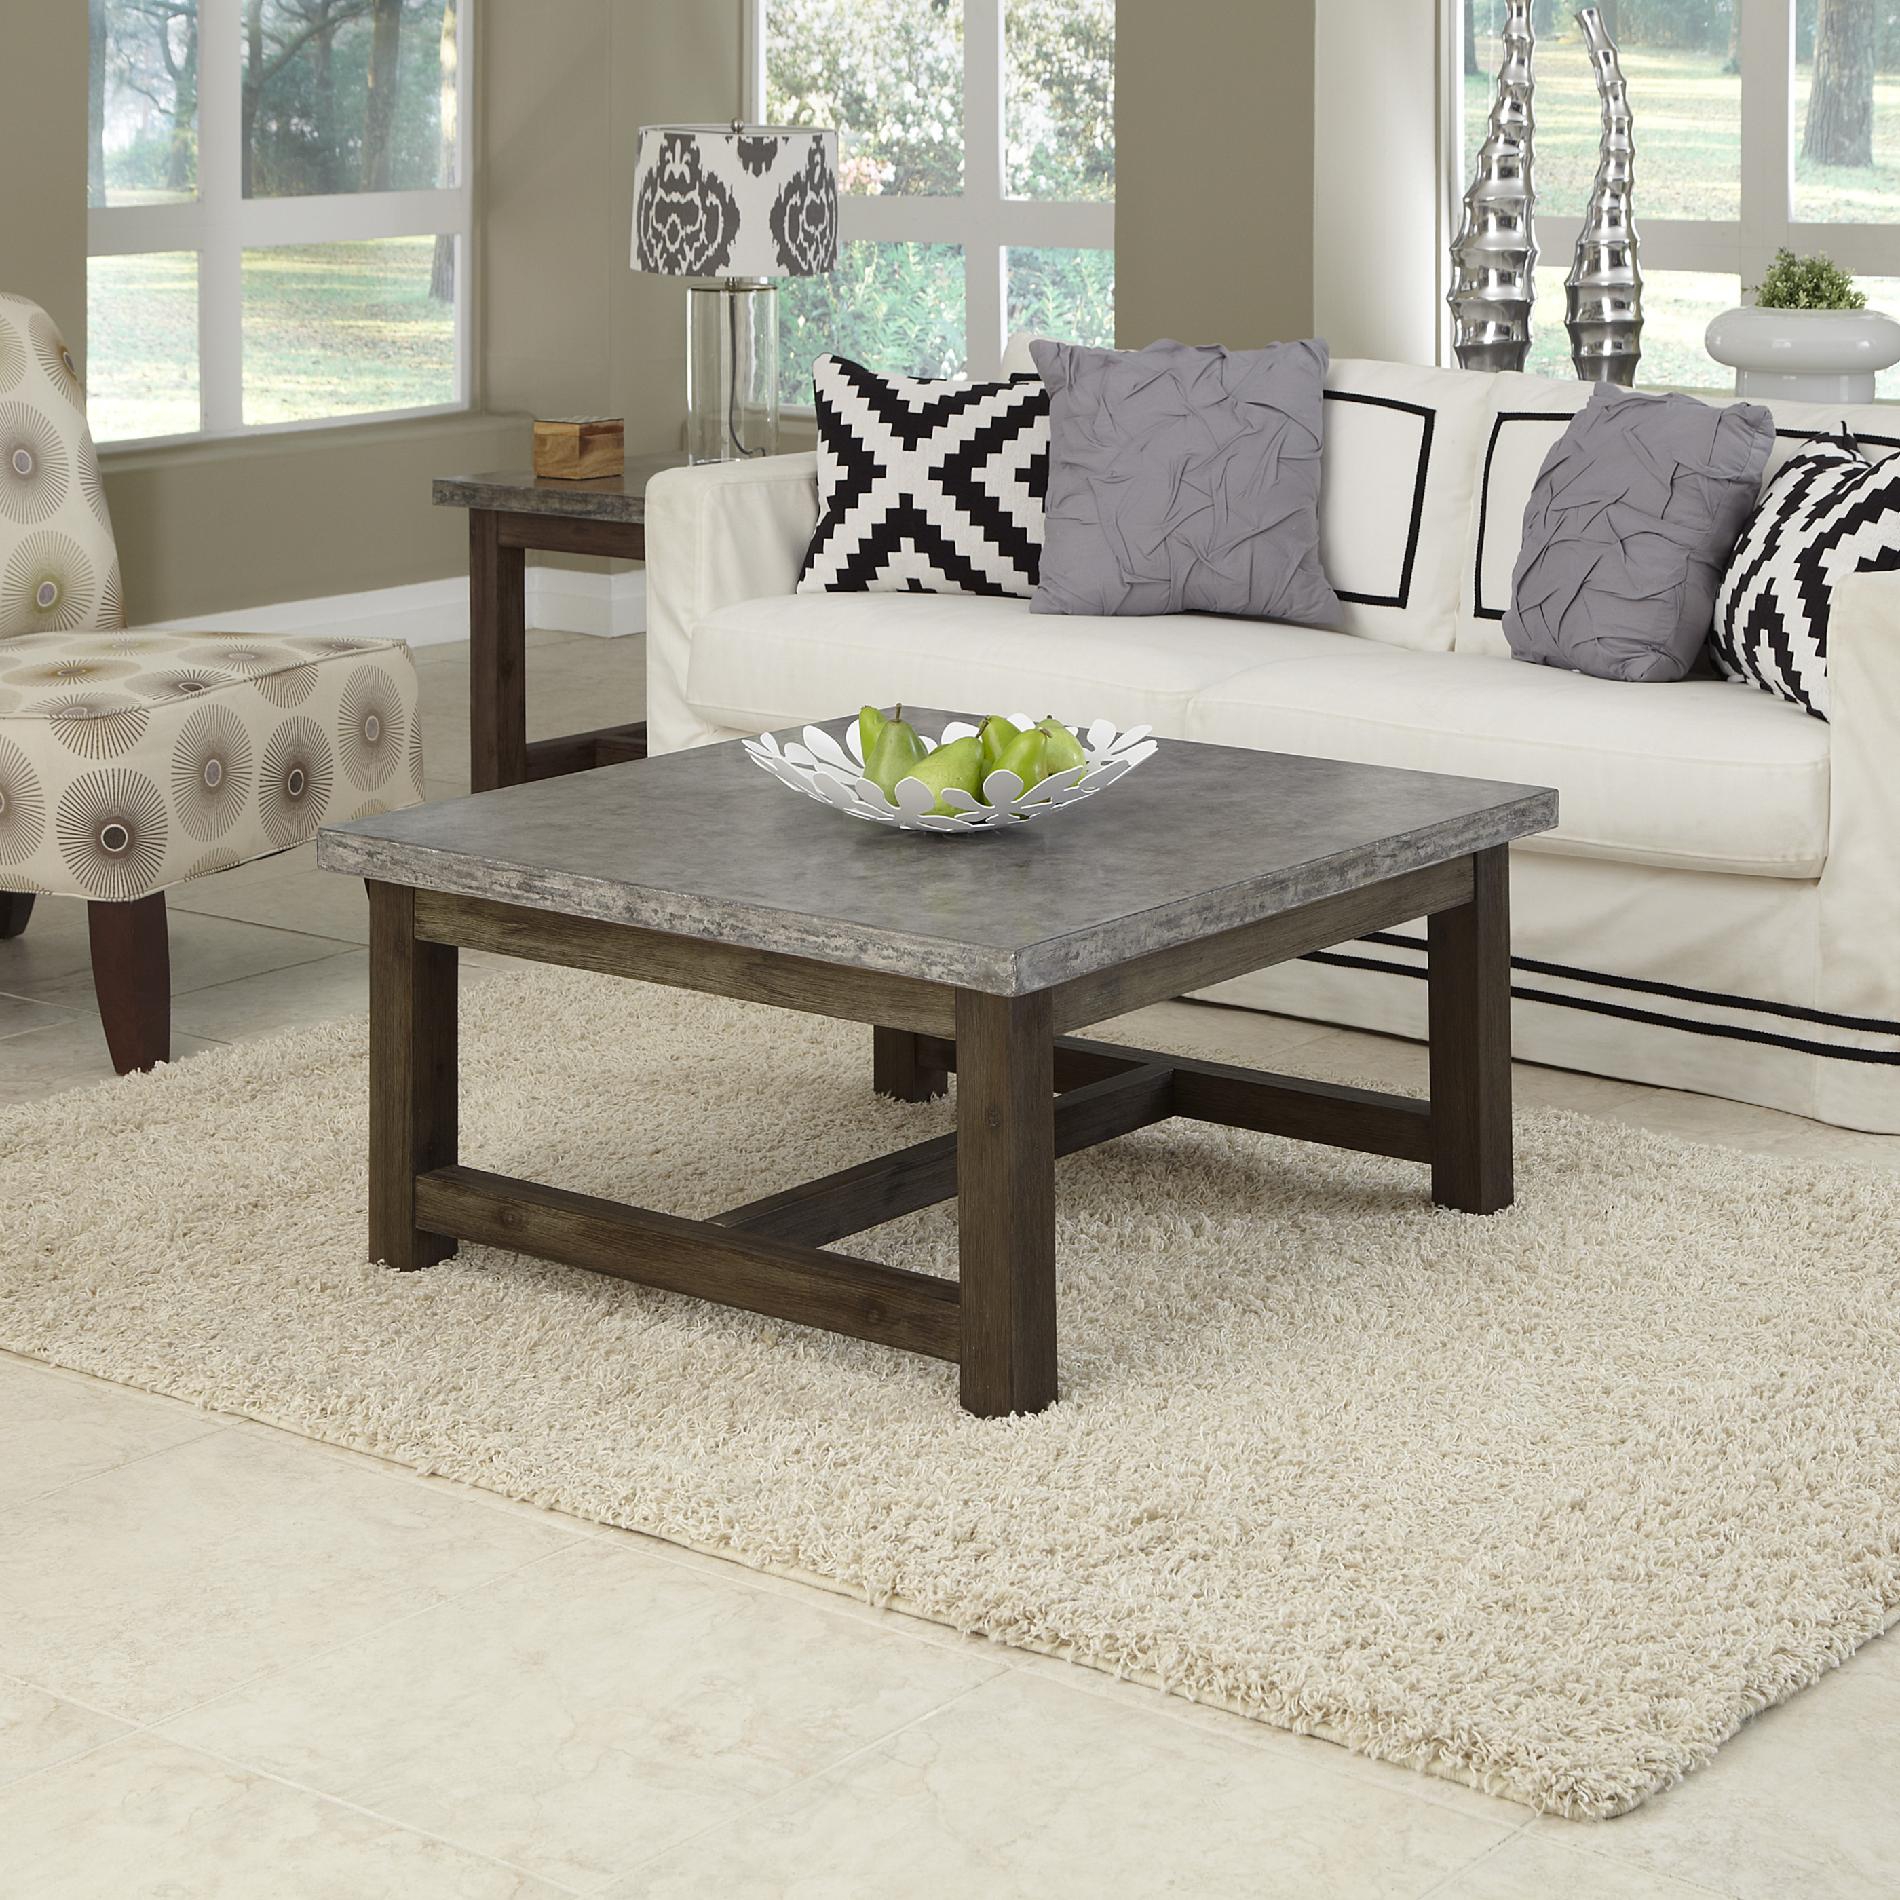 Home Styles Square Concrete Chic Coffee Table